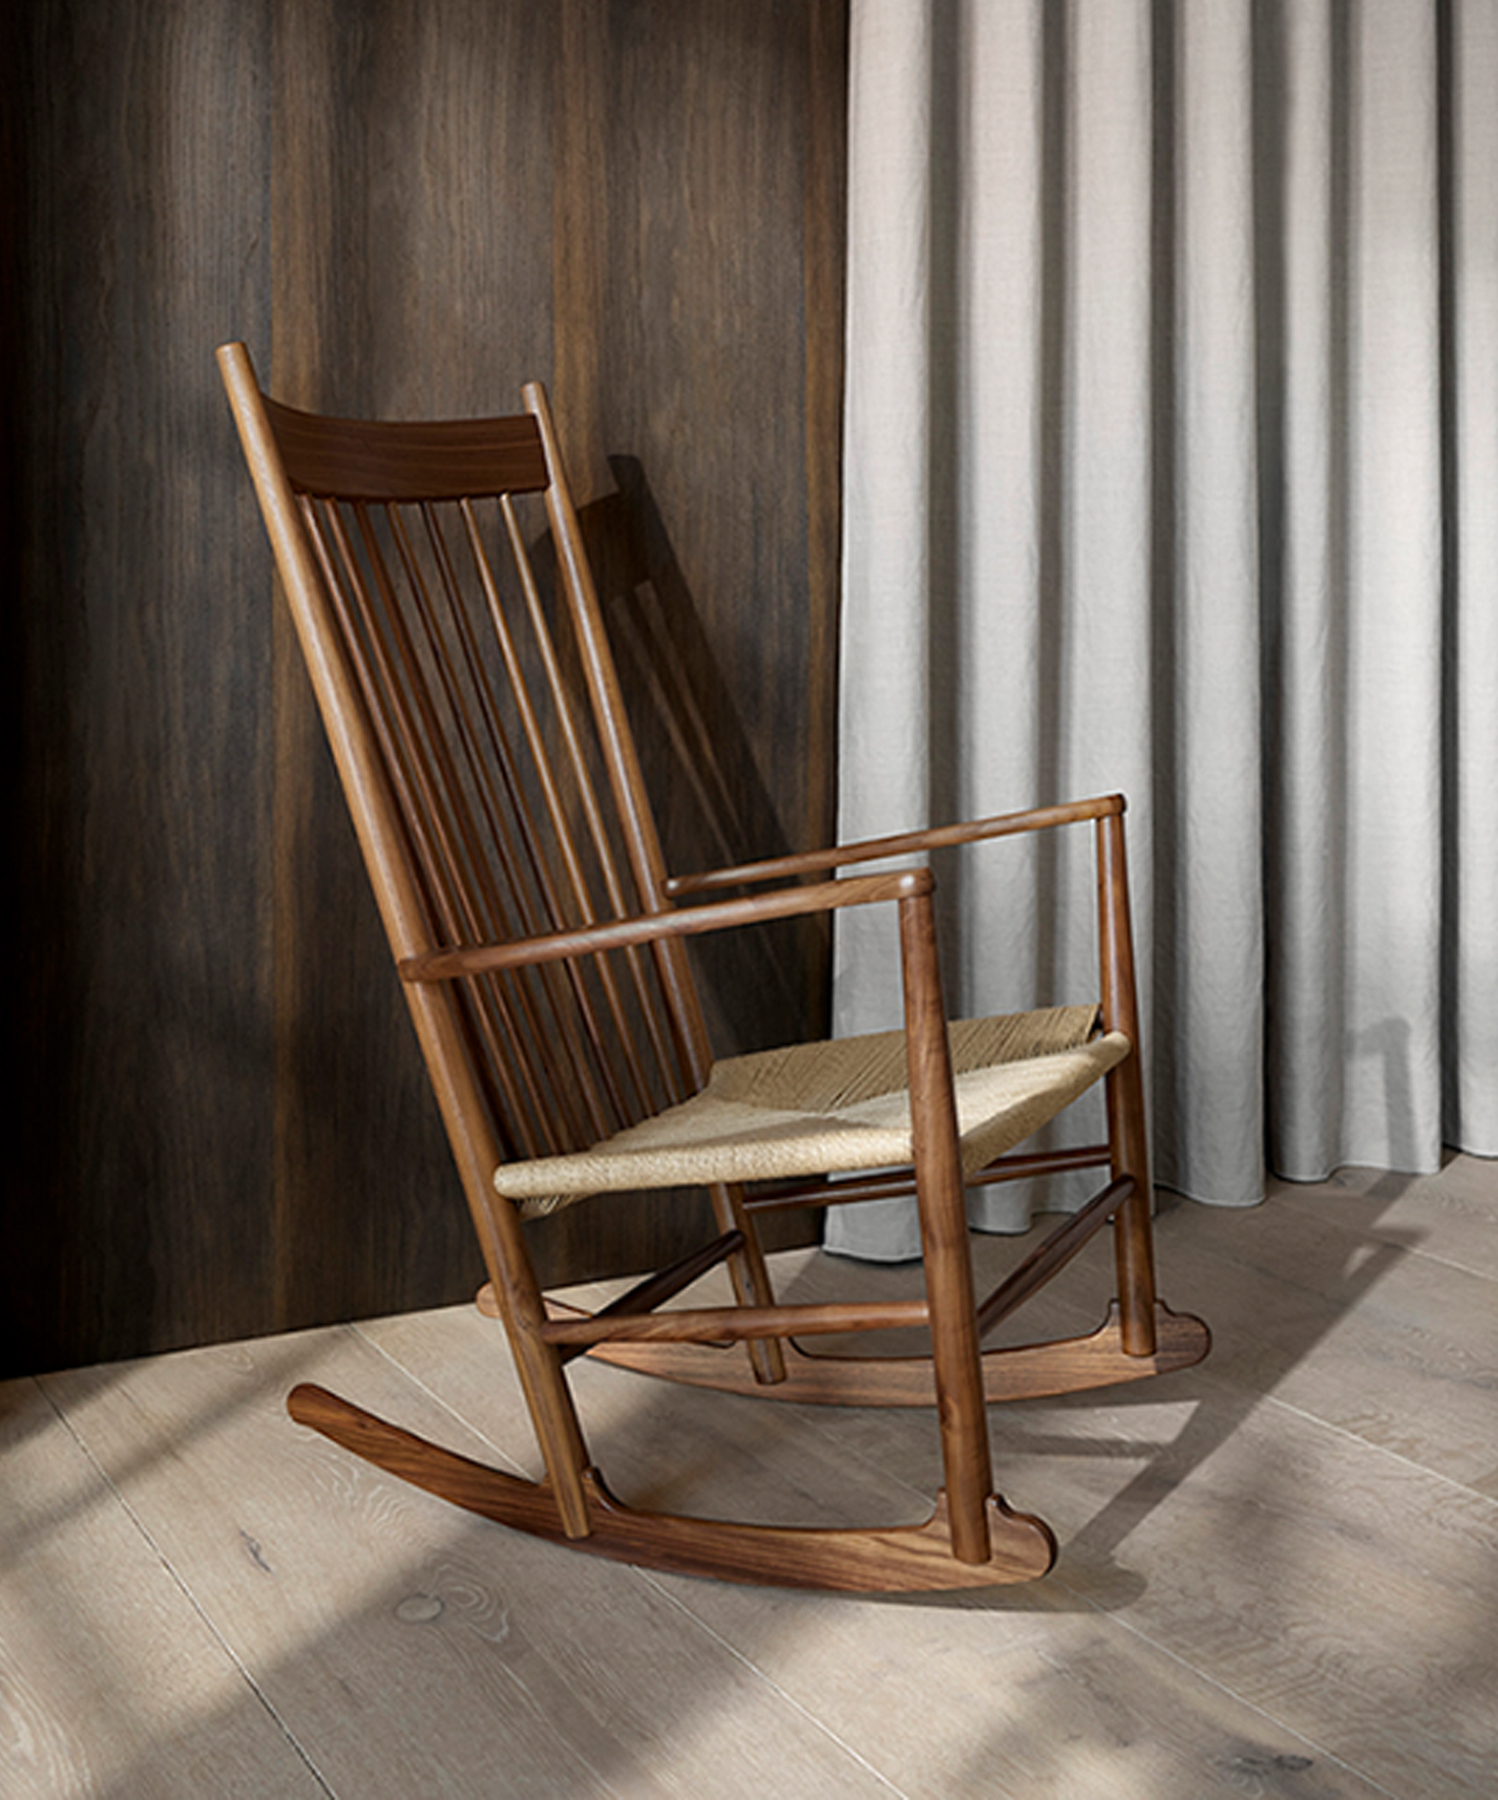 Fredericia is slated to introduce the iconic chair in solid walnut 